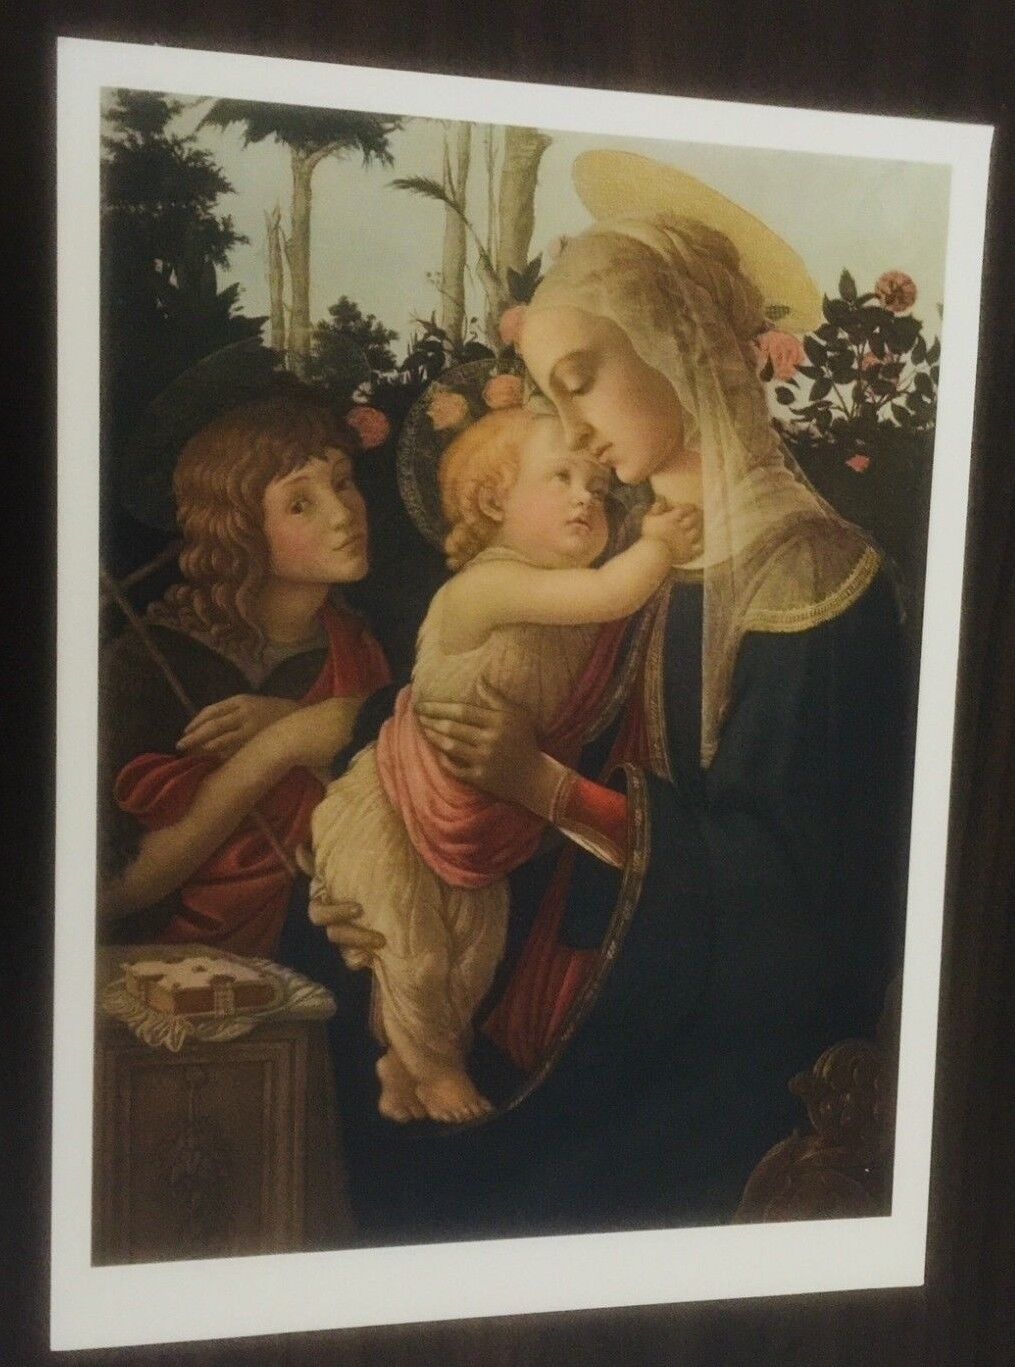 The Virgin and Child with Saint John the Baptist by Sandro Botticelli Artwork - Bob and Penny Lord